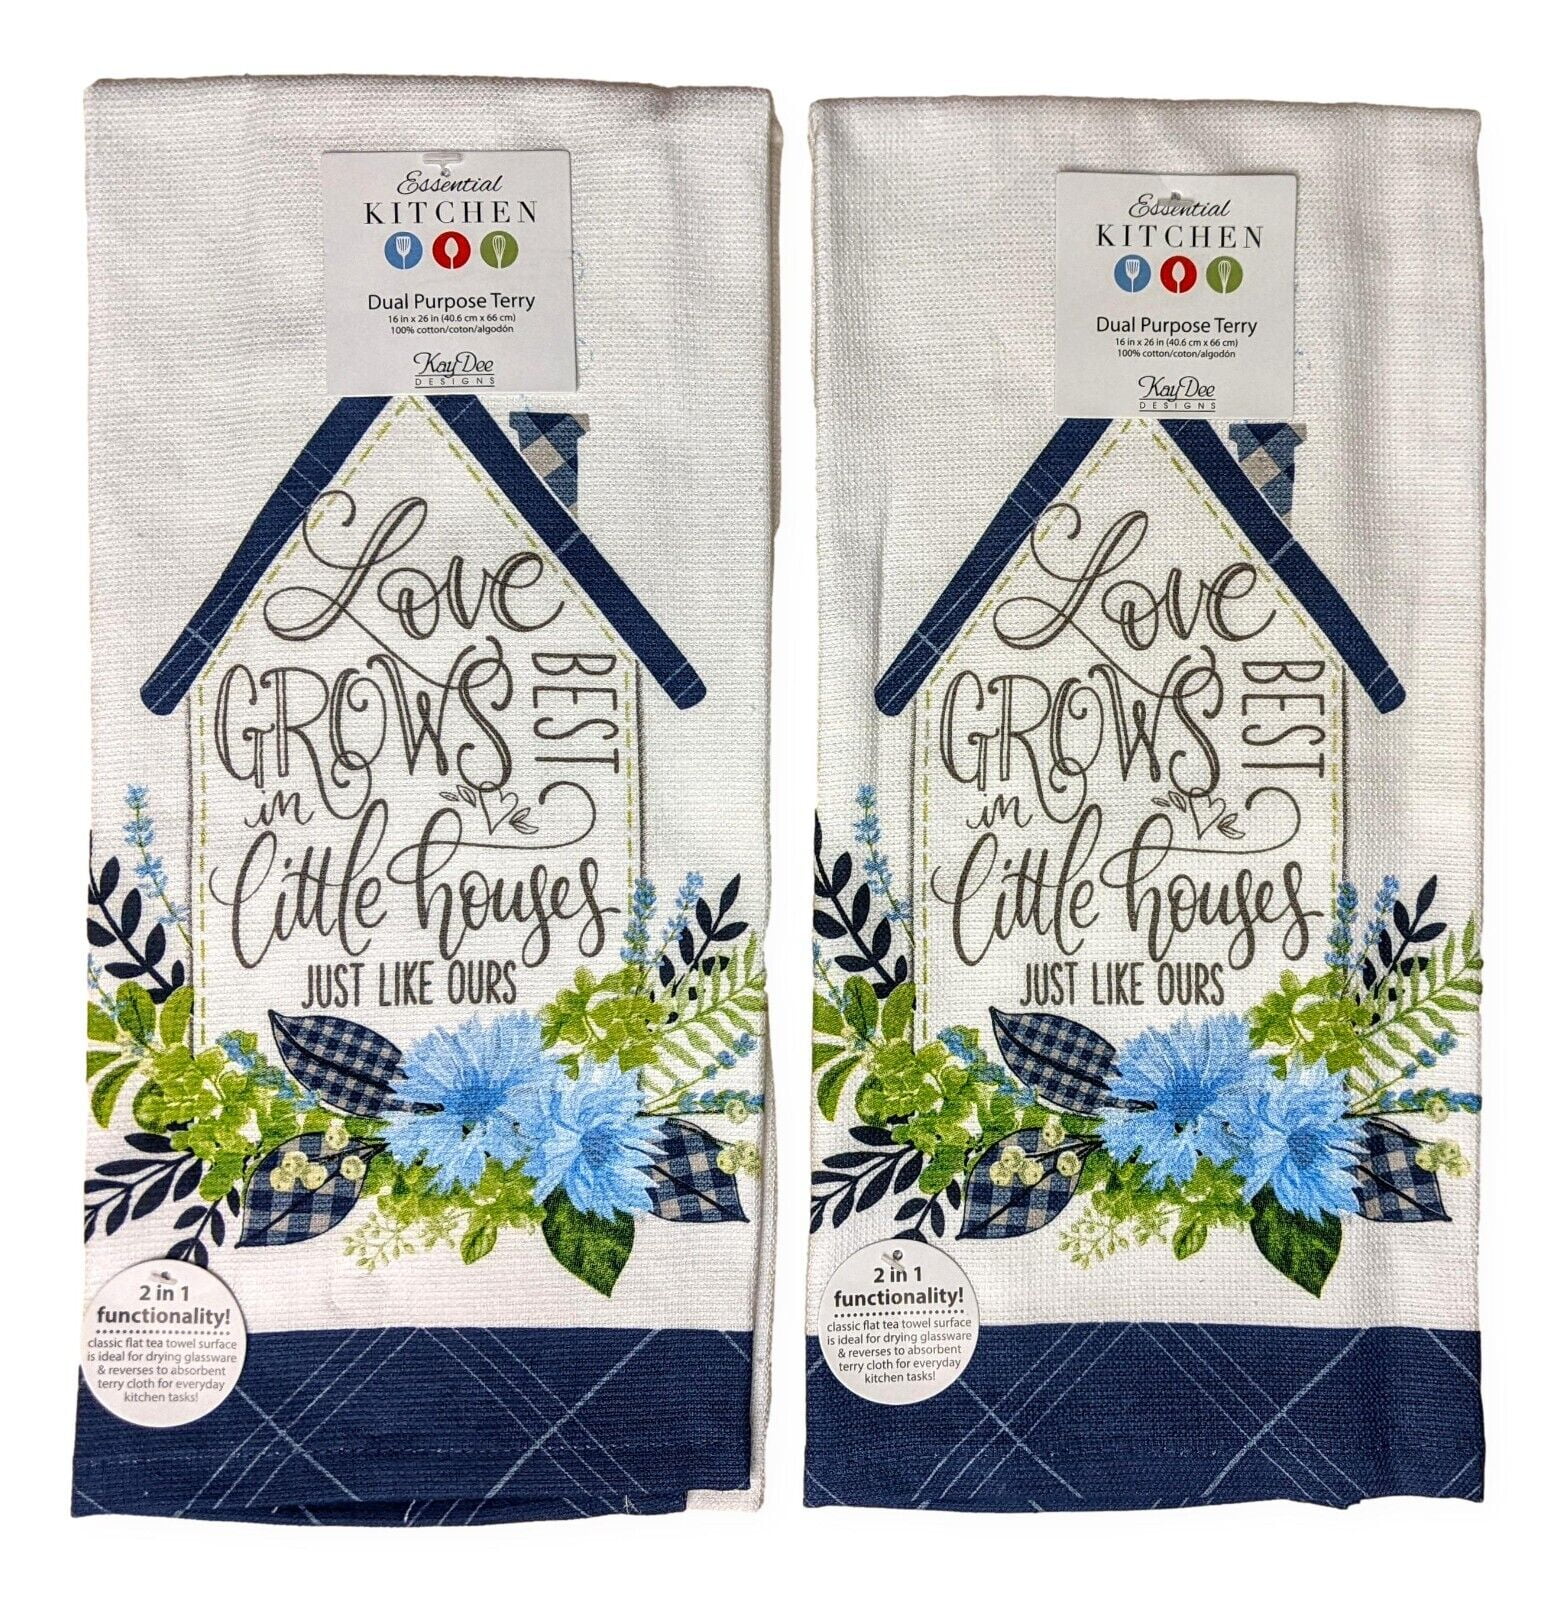  COTTON CRAFT Amazing Kitchen Towels - Set of 12 Terry